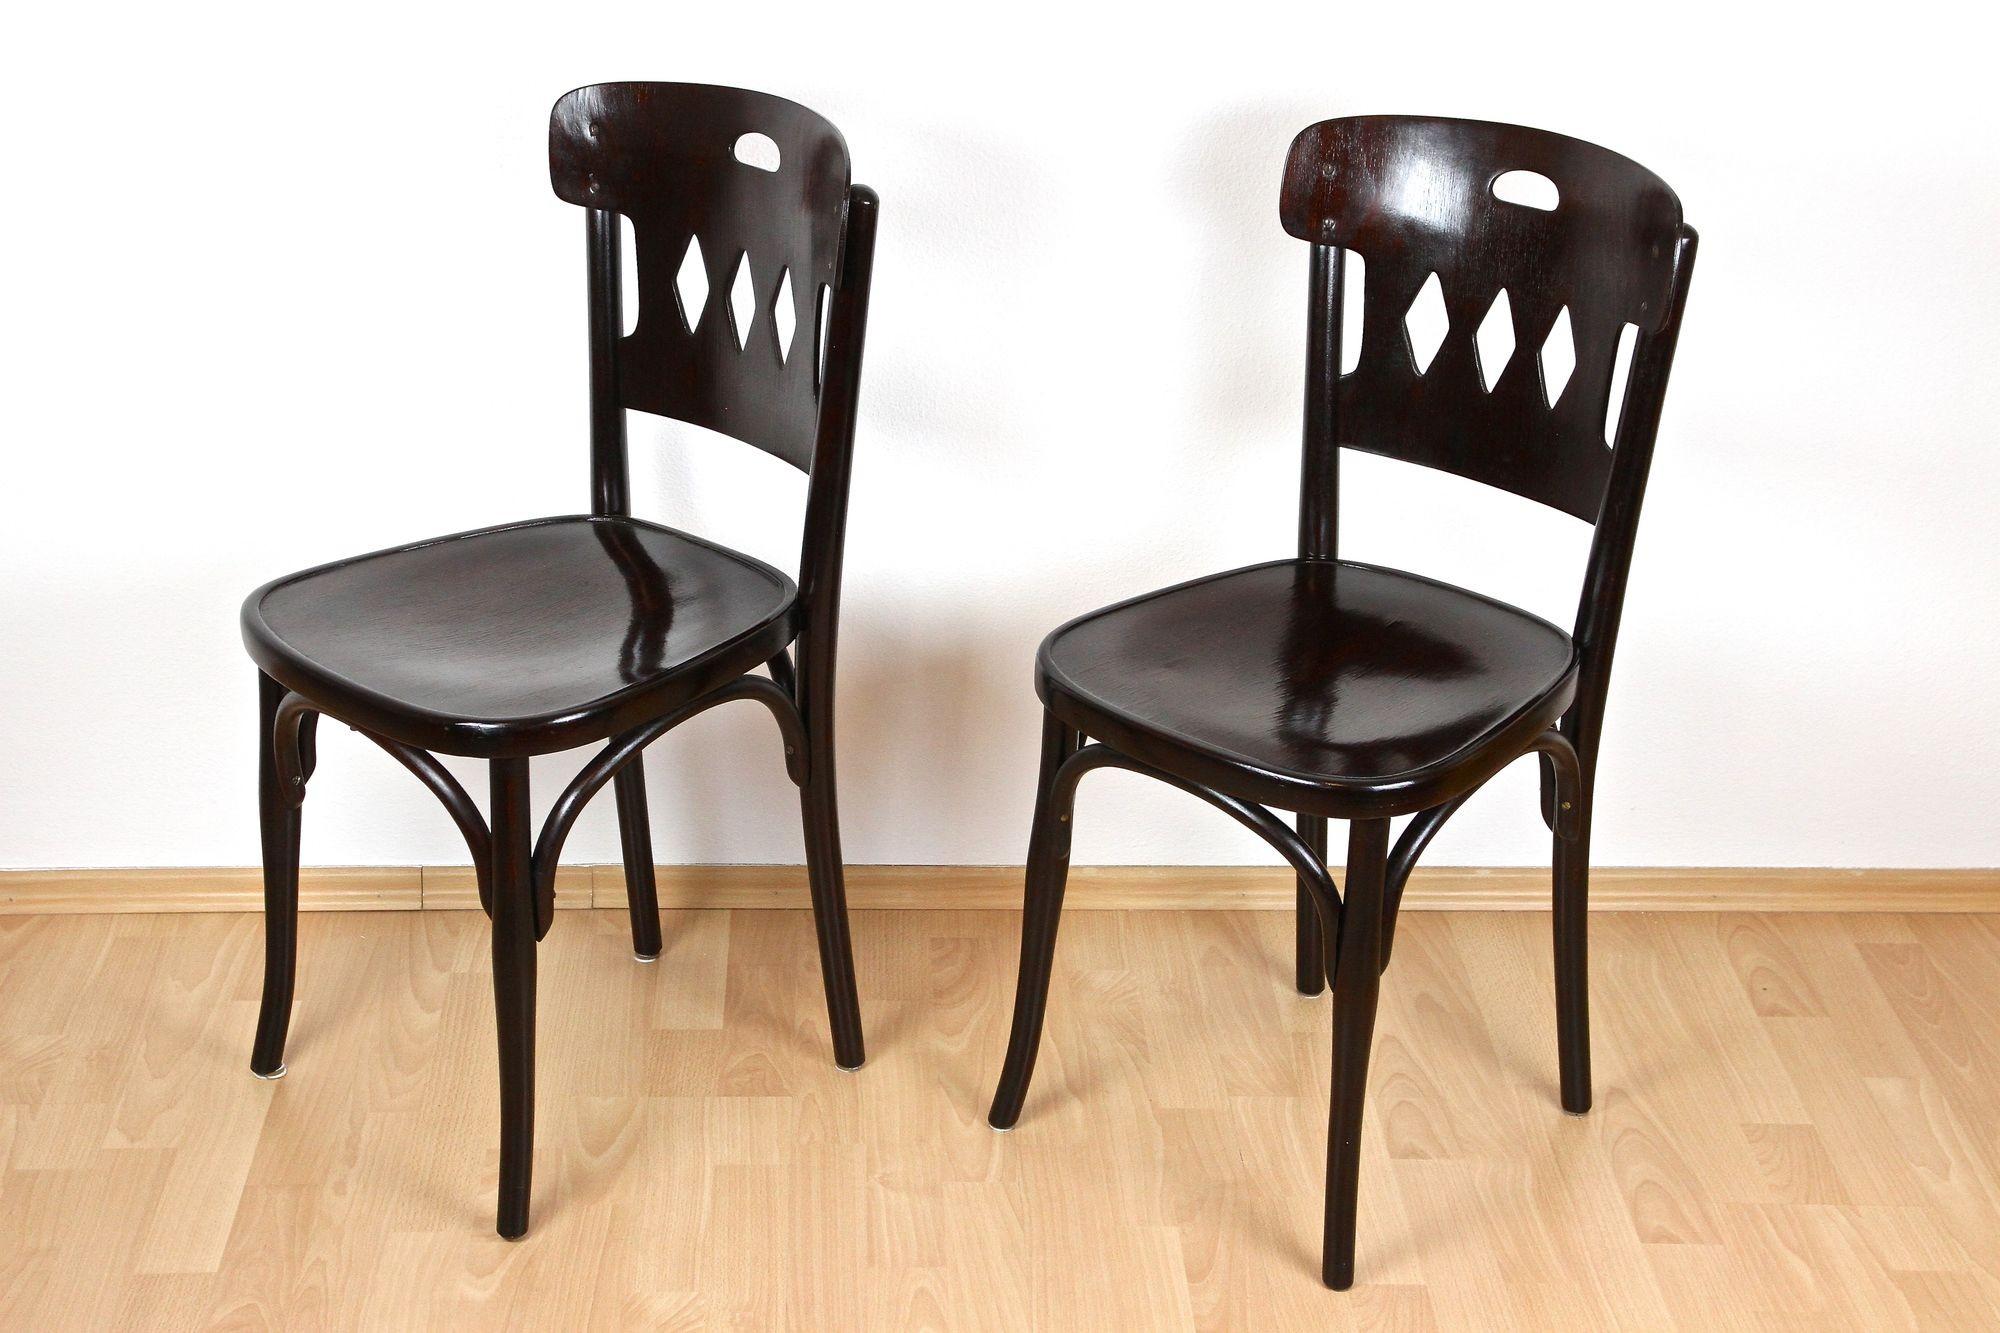 Pair Of Art Nouveau Bentwood Chairs by J&J Kohn, Vienna ca. 1910 For Sale 8